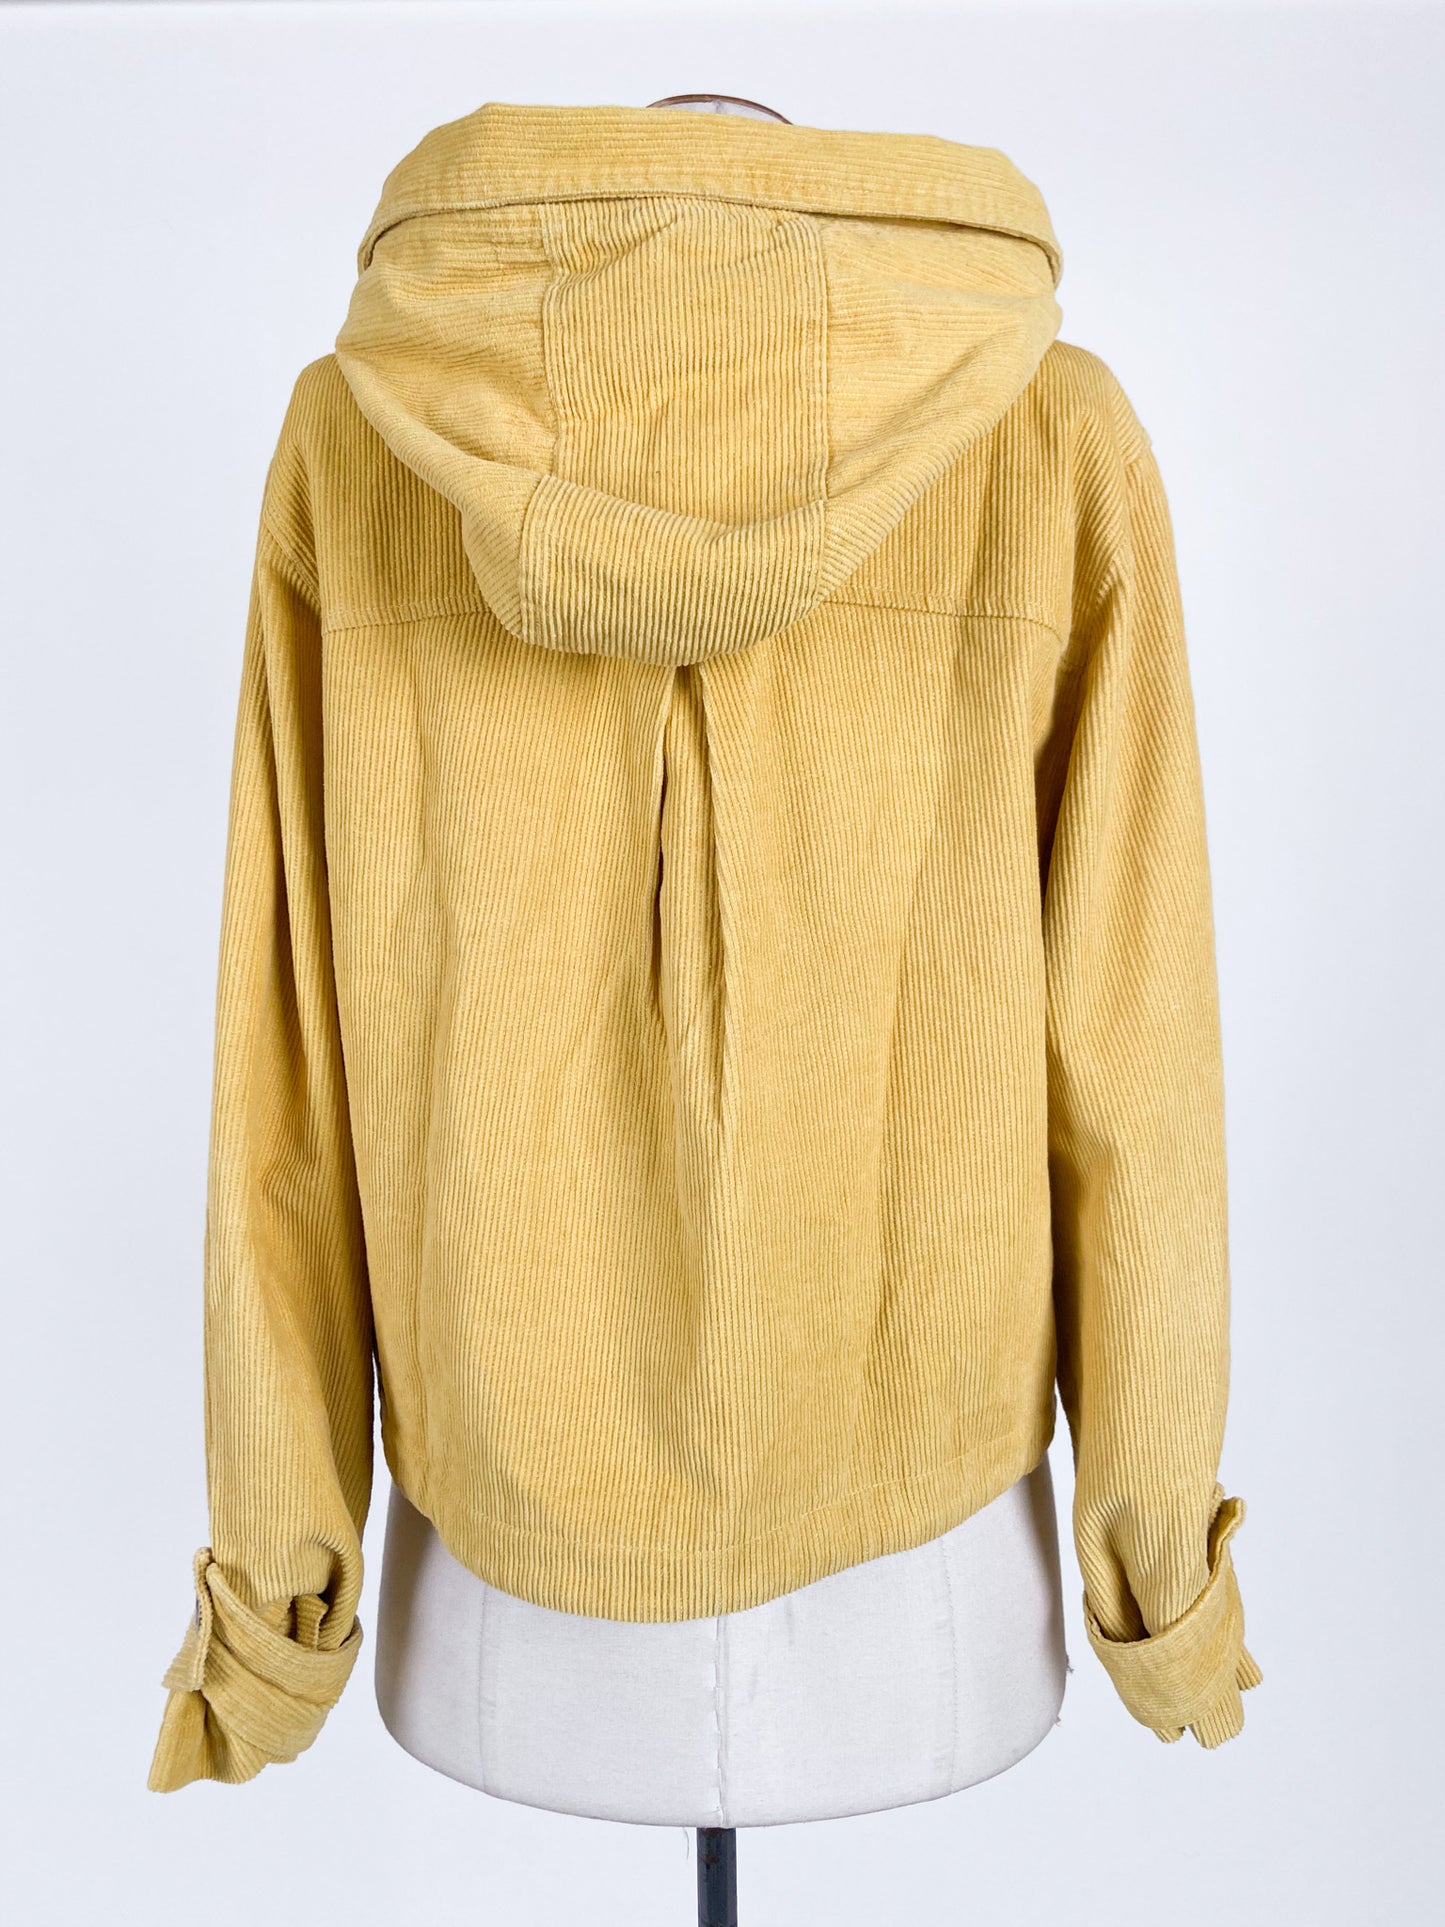 Urban | Yellow Casual Top | Size S